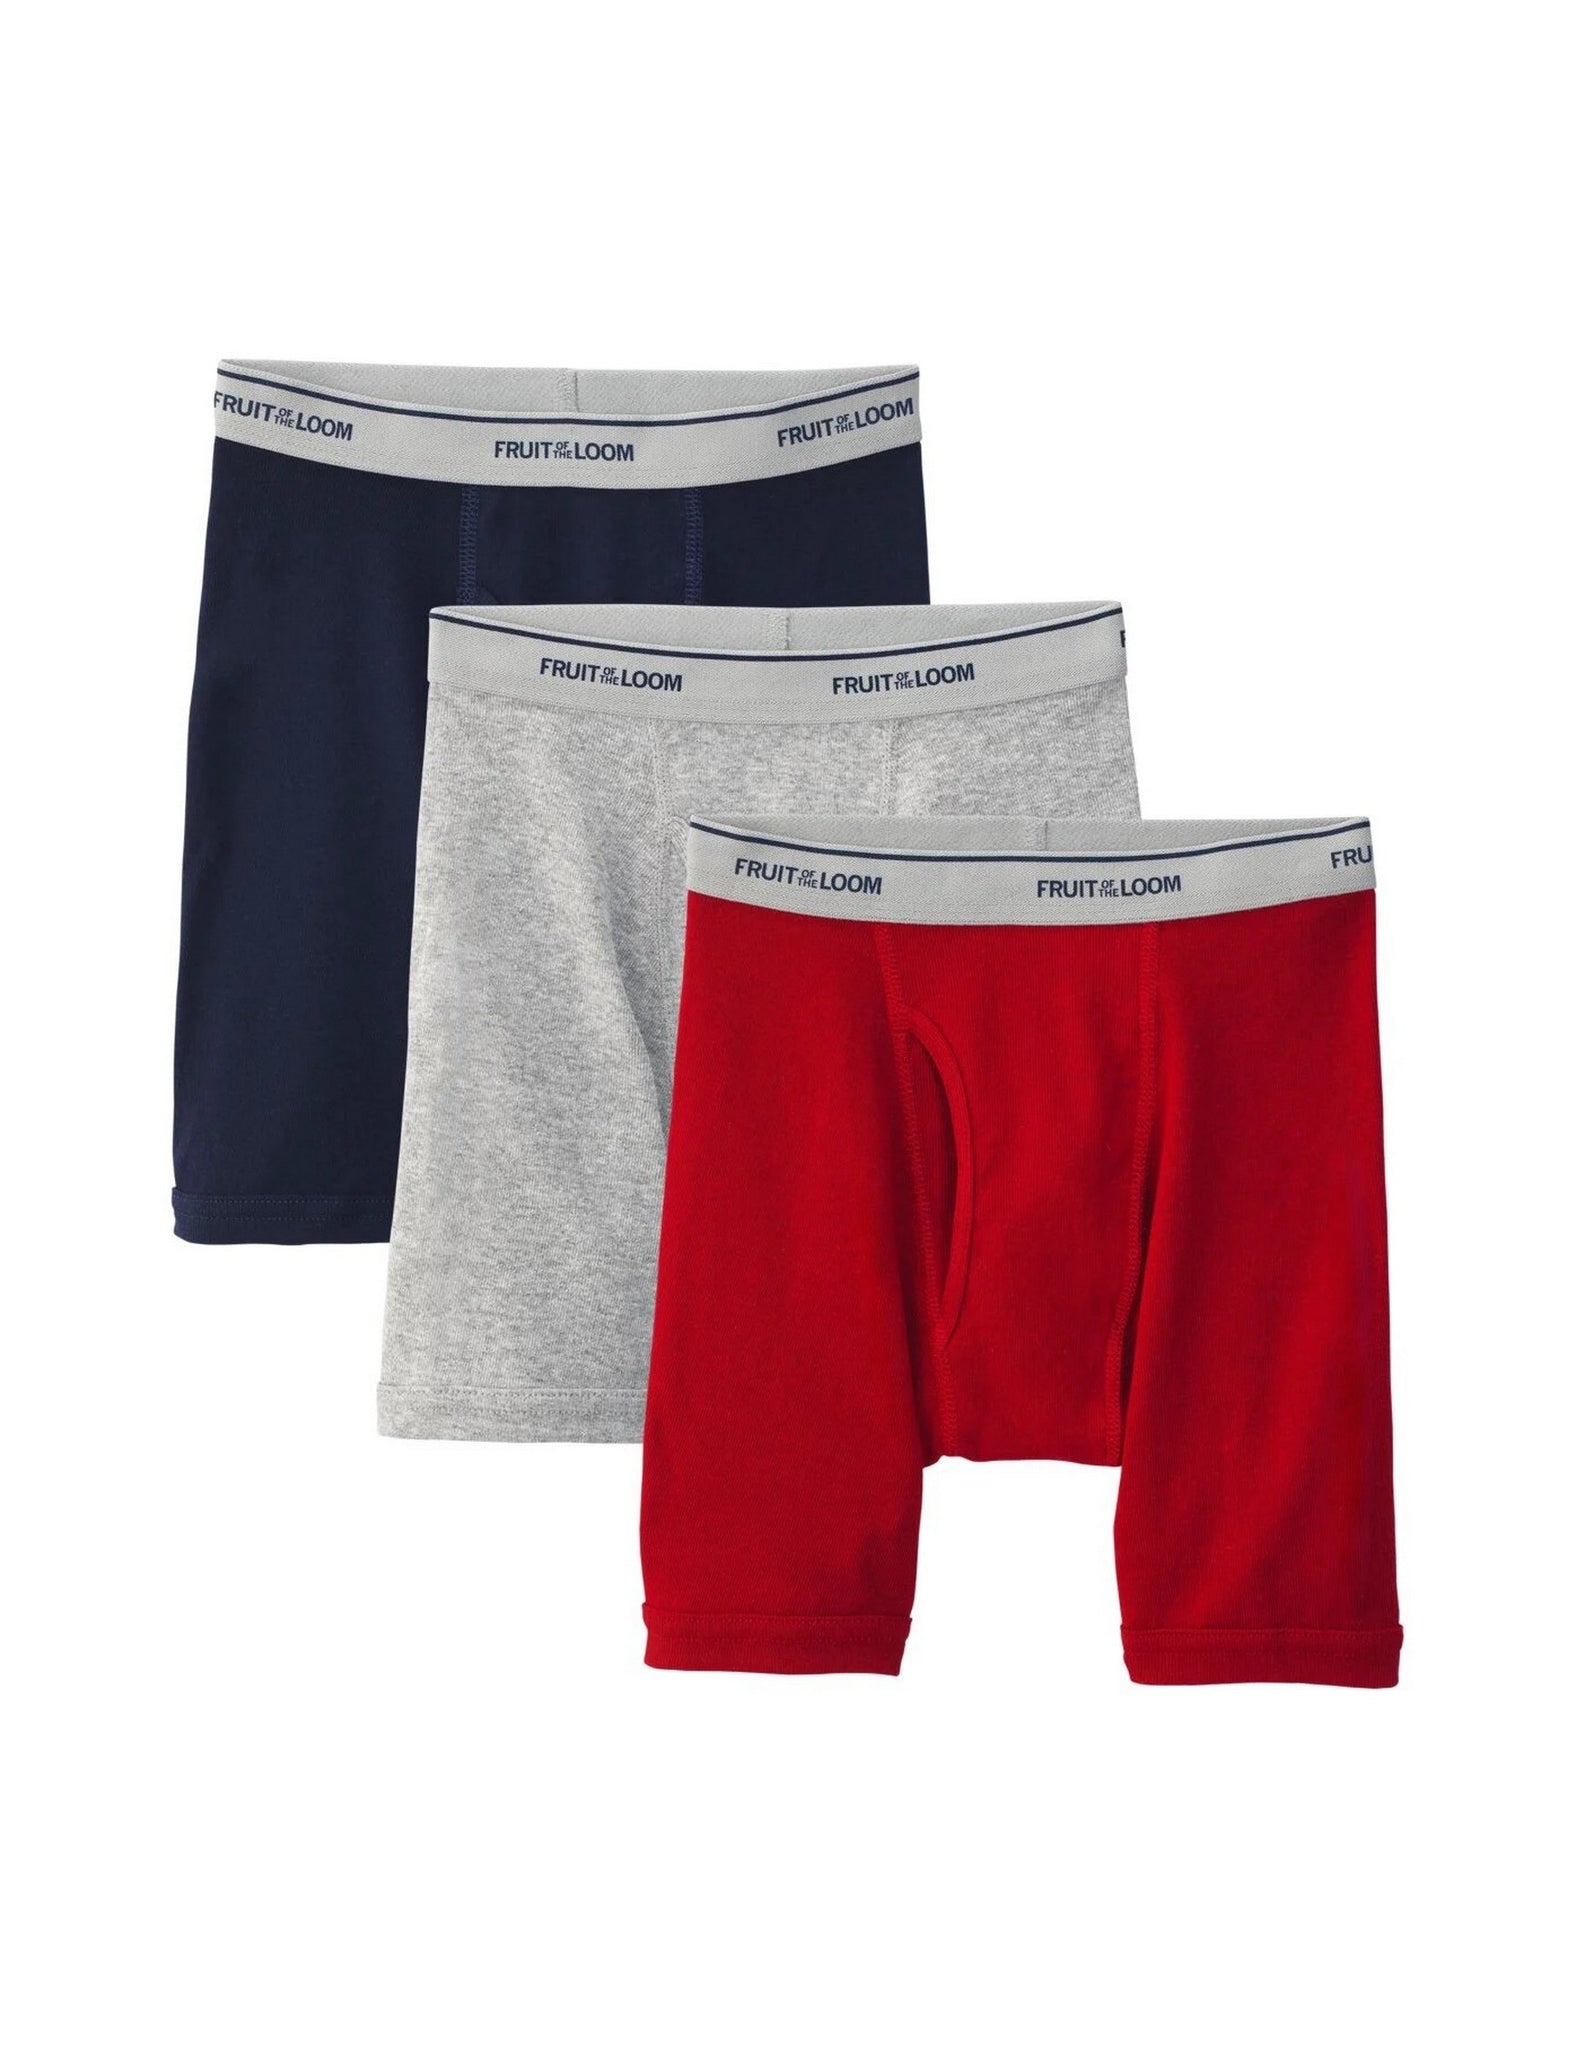 Fruit Of The Loom Boxer Briefs 3-pack Review 